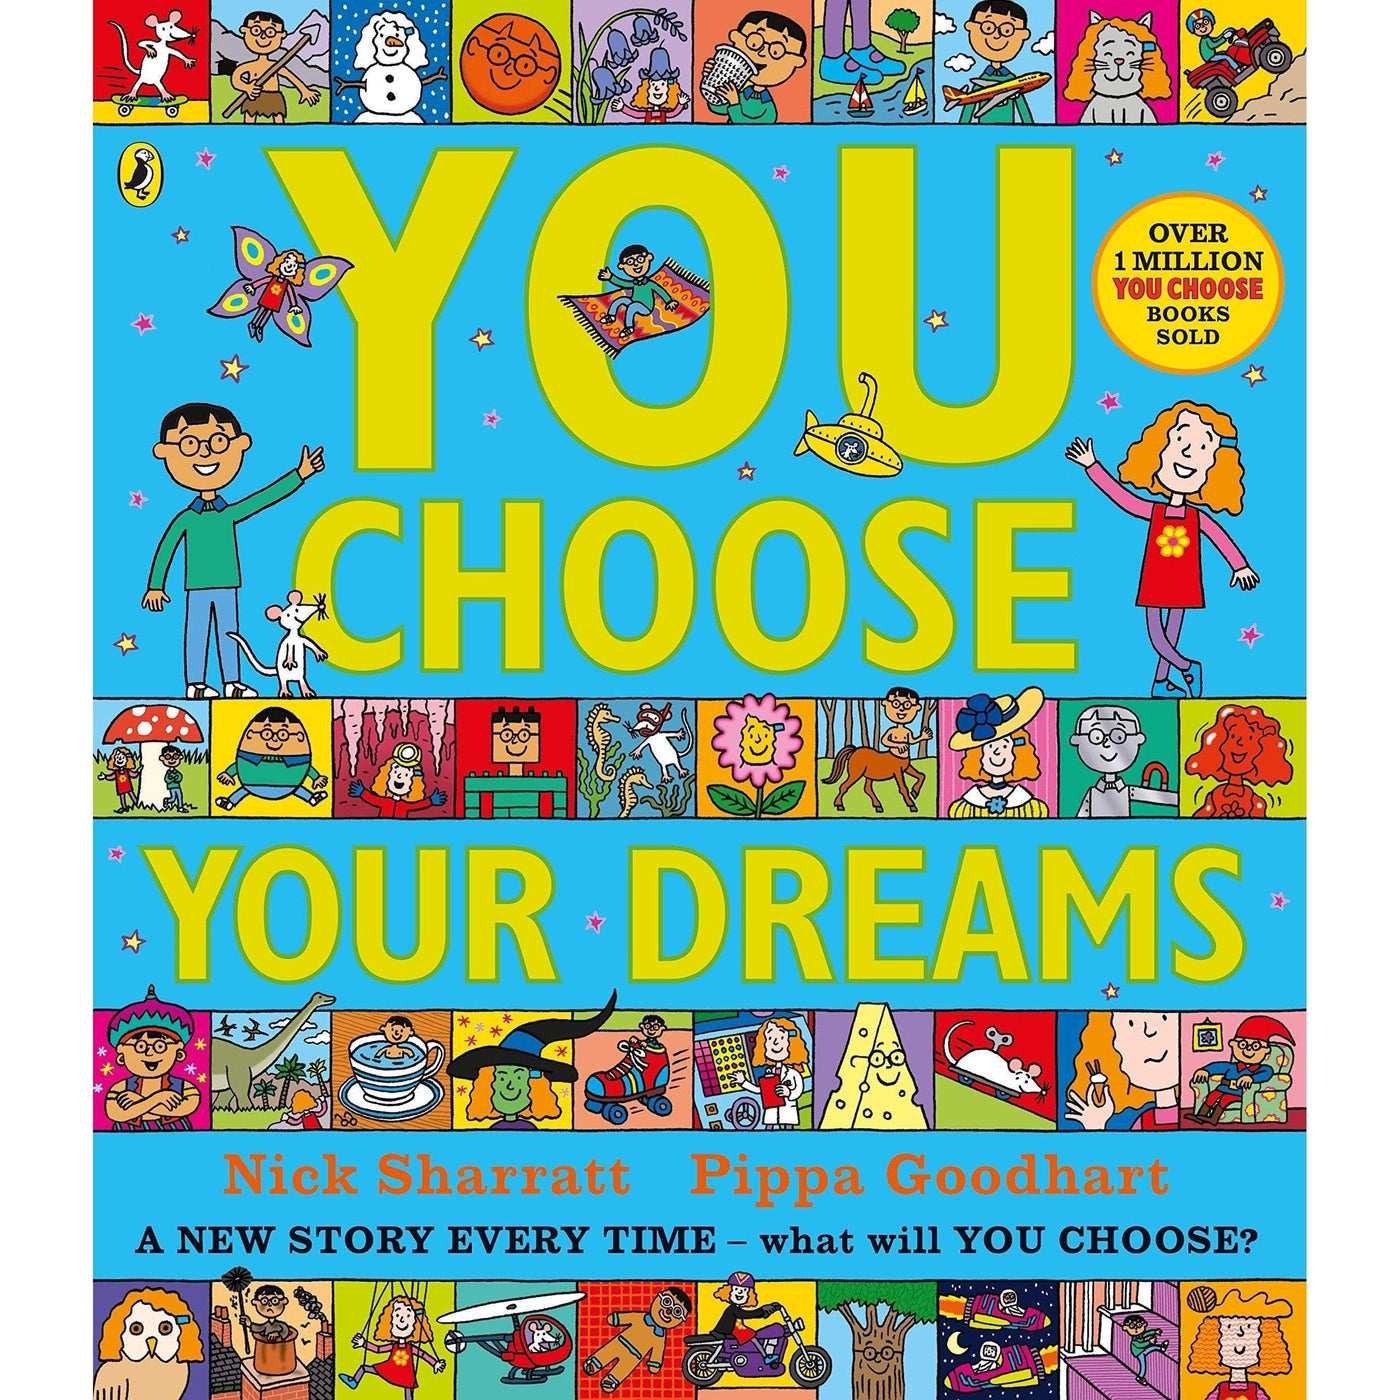 You Choose Your Dreams: Originally published as Just Imagine